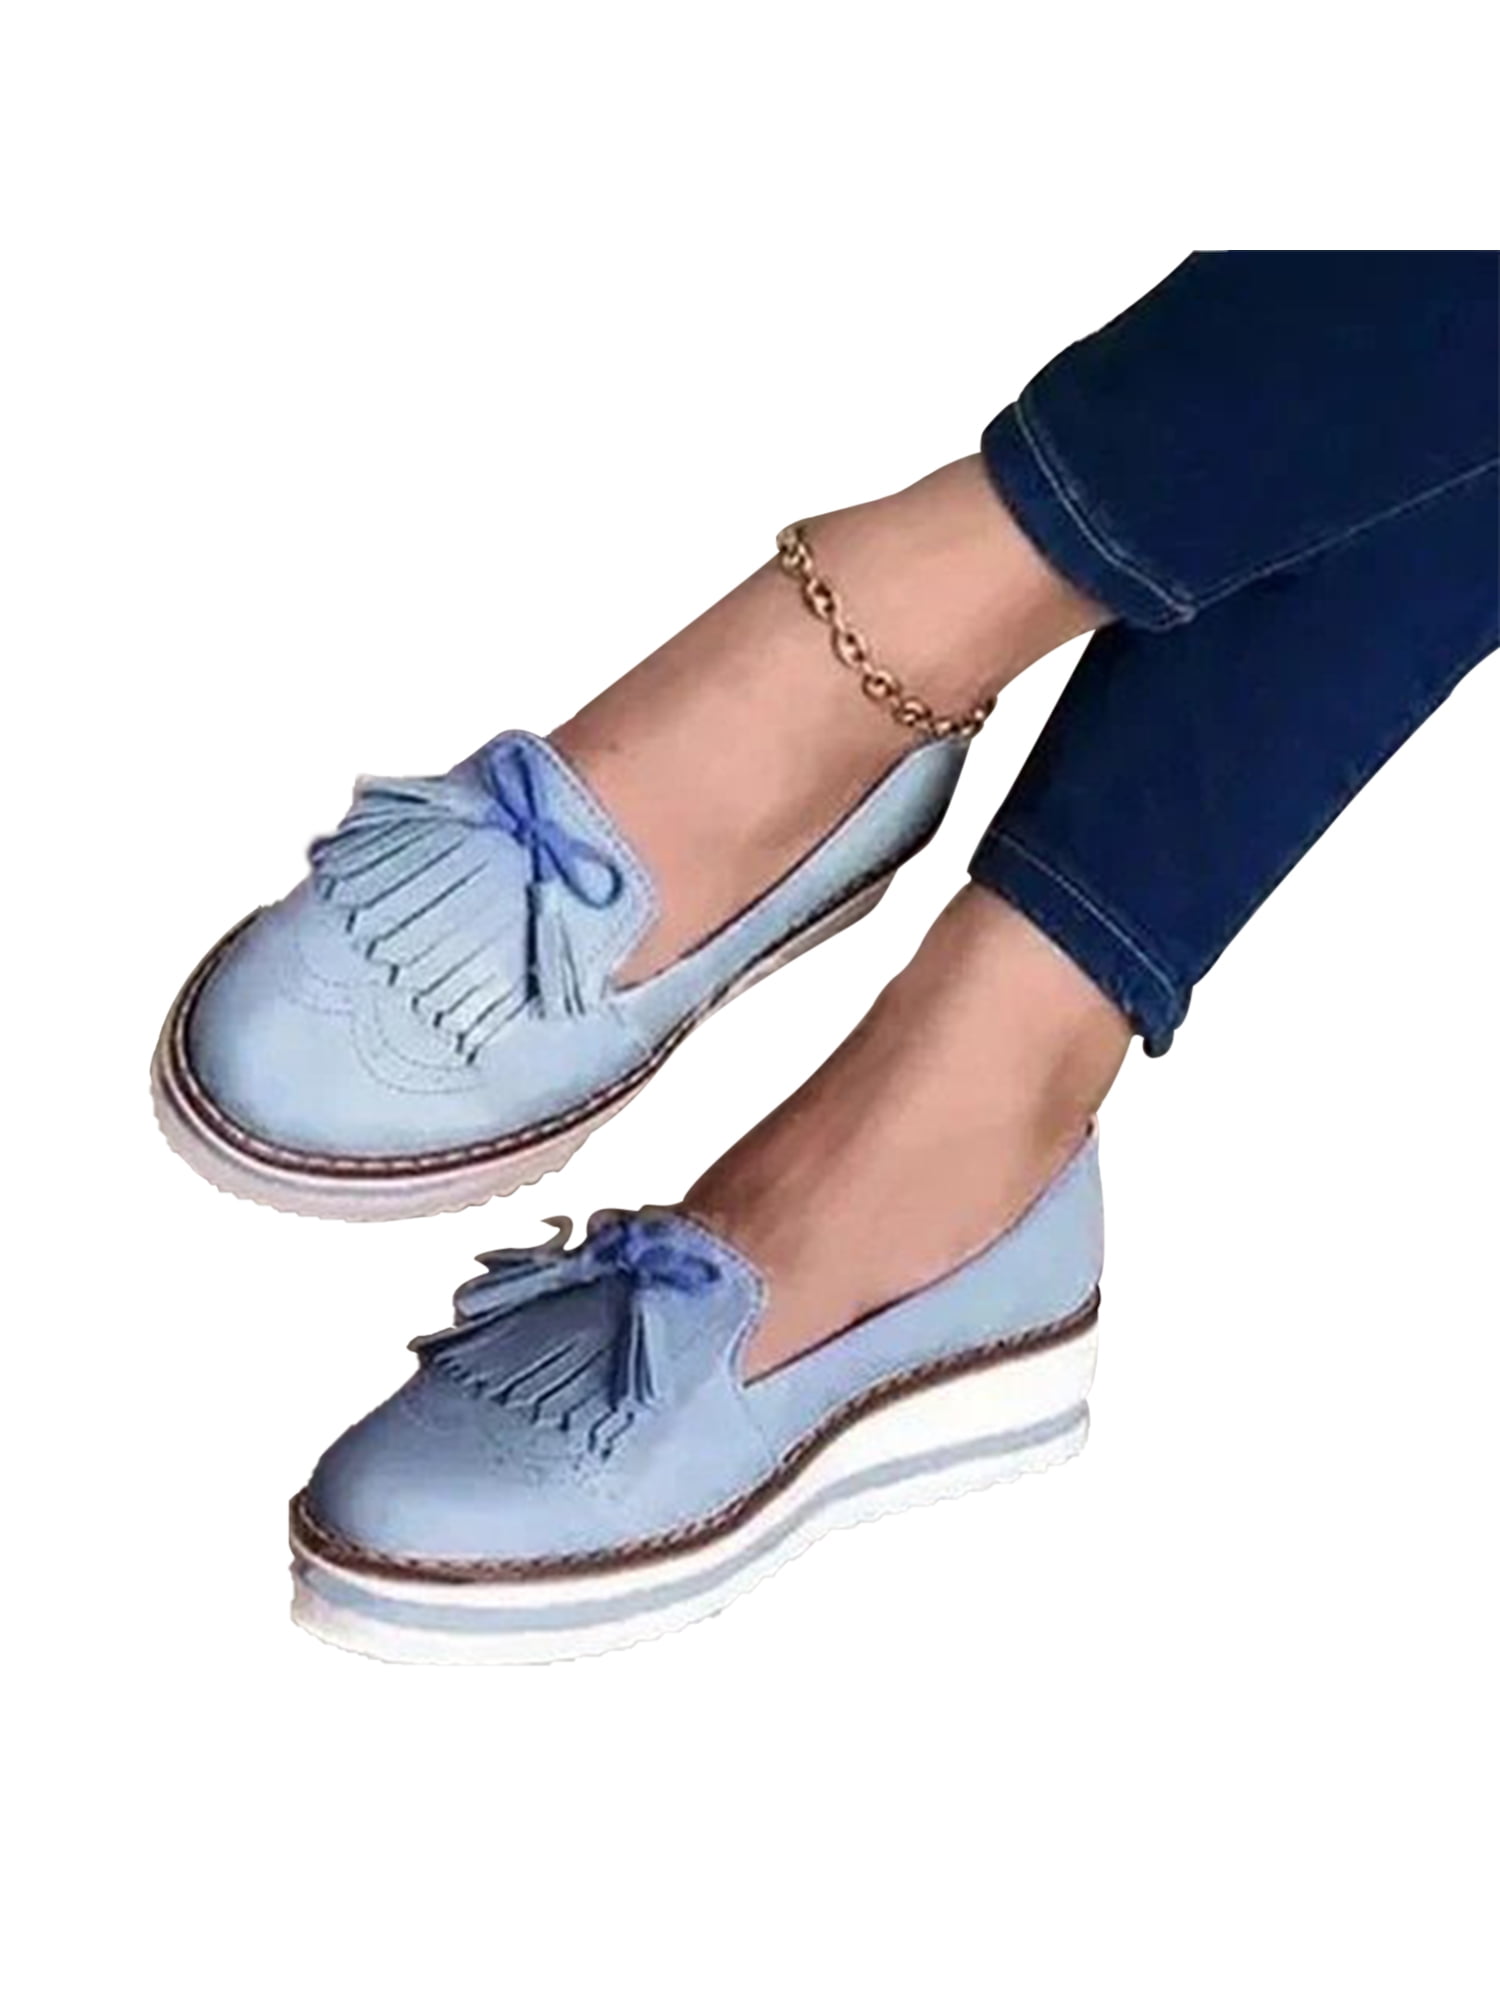 Loafers Sport Shoes Everyday Shoes Athletic Shoes Casual Shoes Big Choice of Colors Women Shoes Moccasins